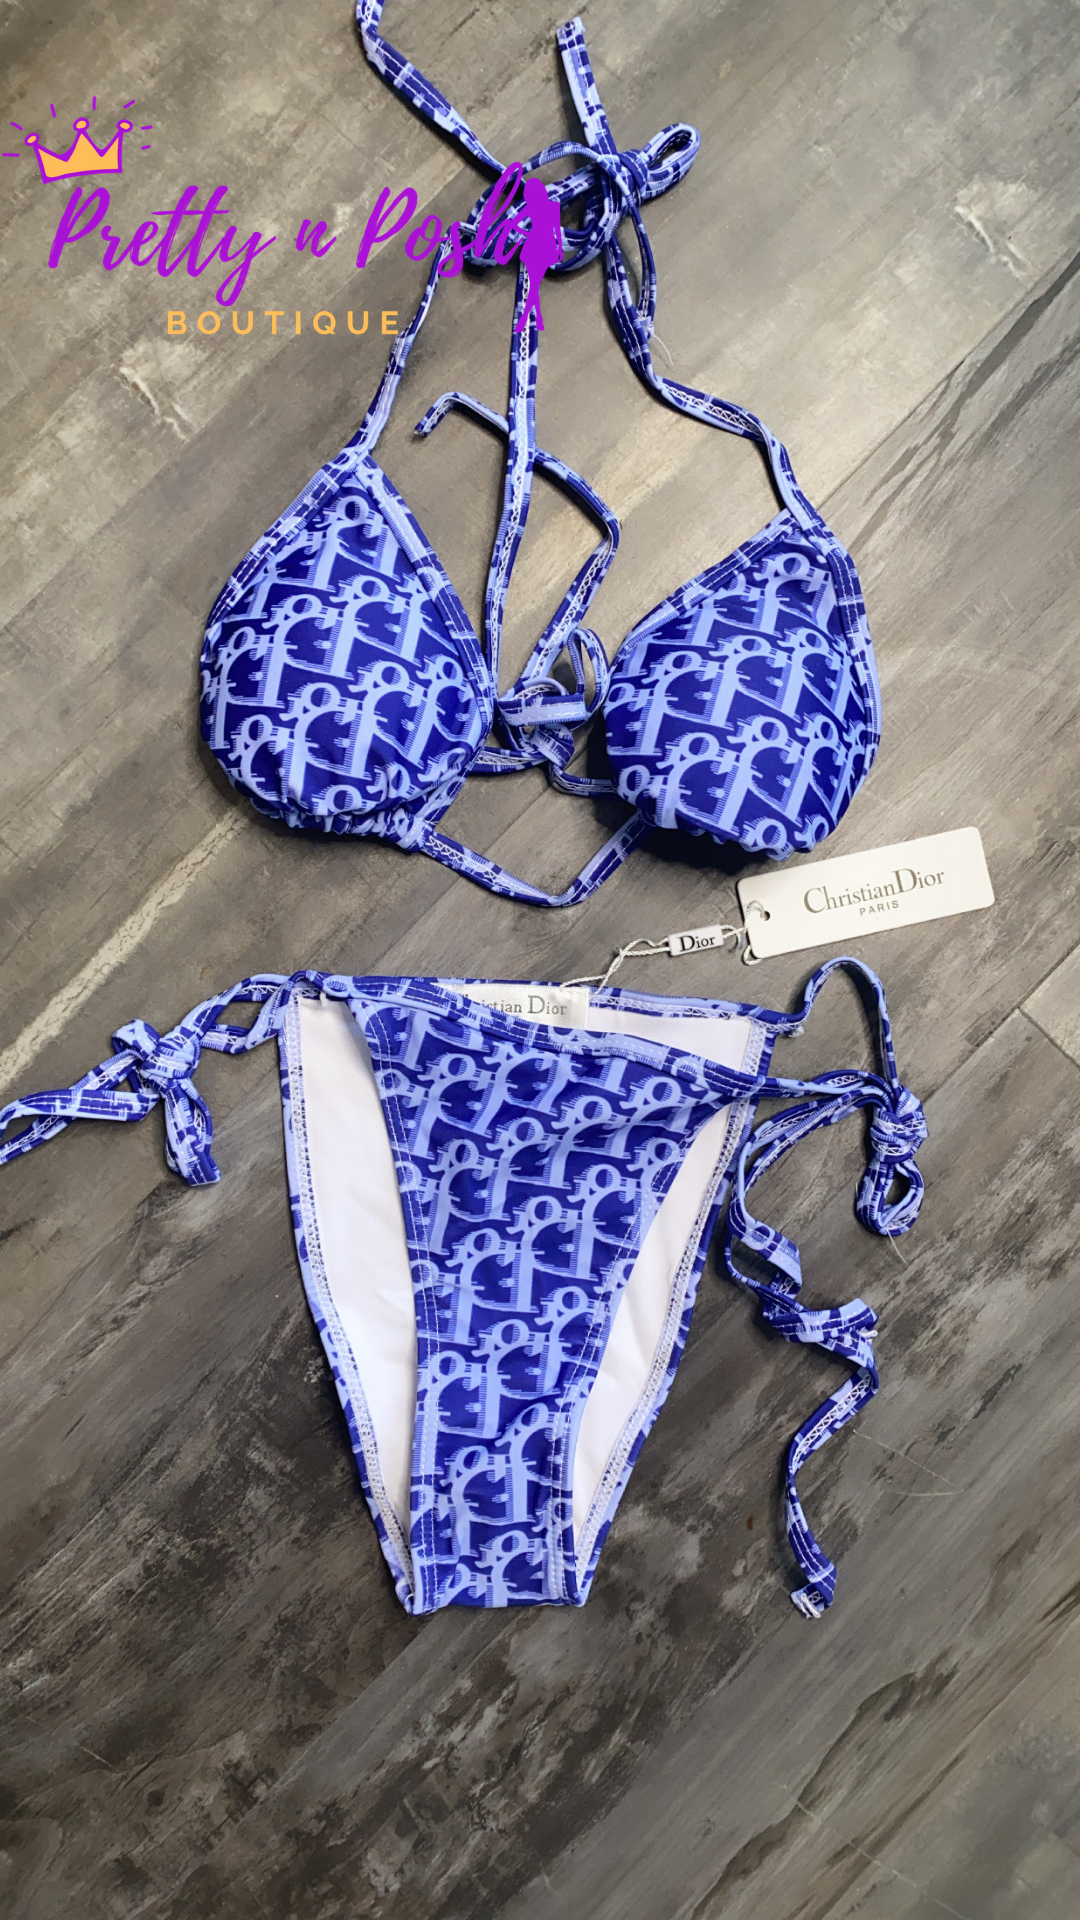 Christian Dior swimsuit | Boutique Londyn